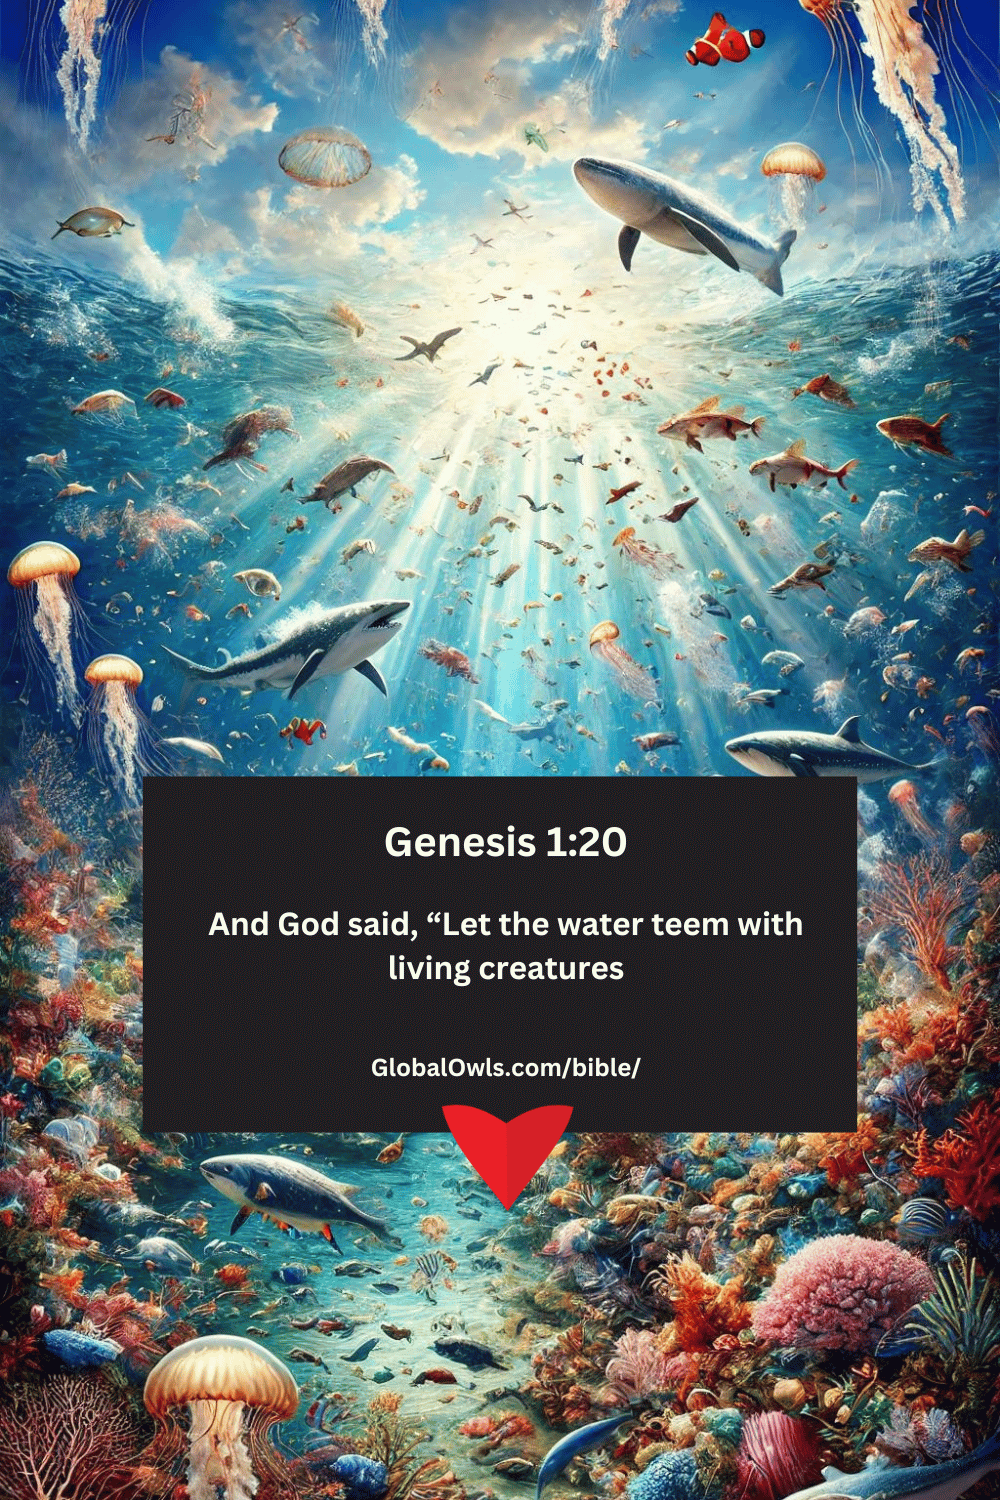 Genesis 1-20 And God said, “Let the water teem with living creatures